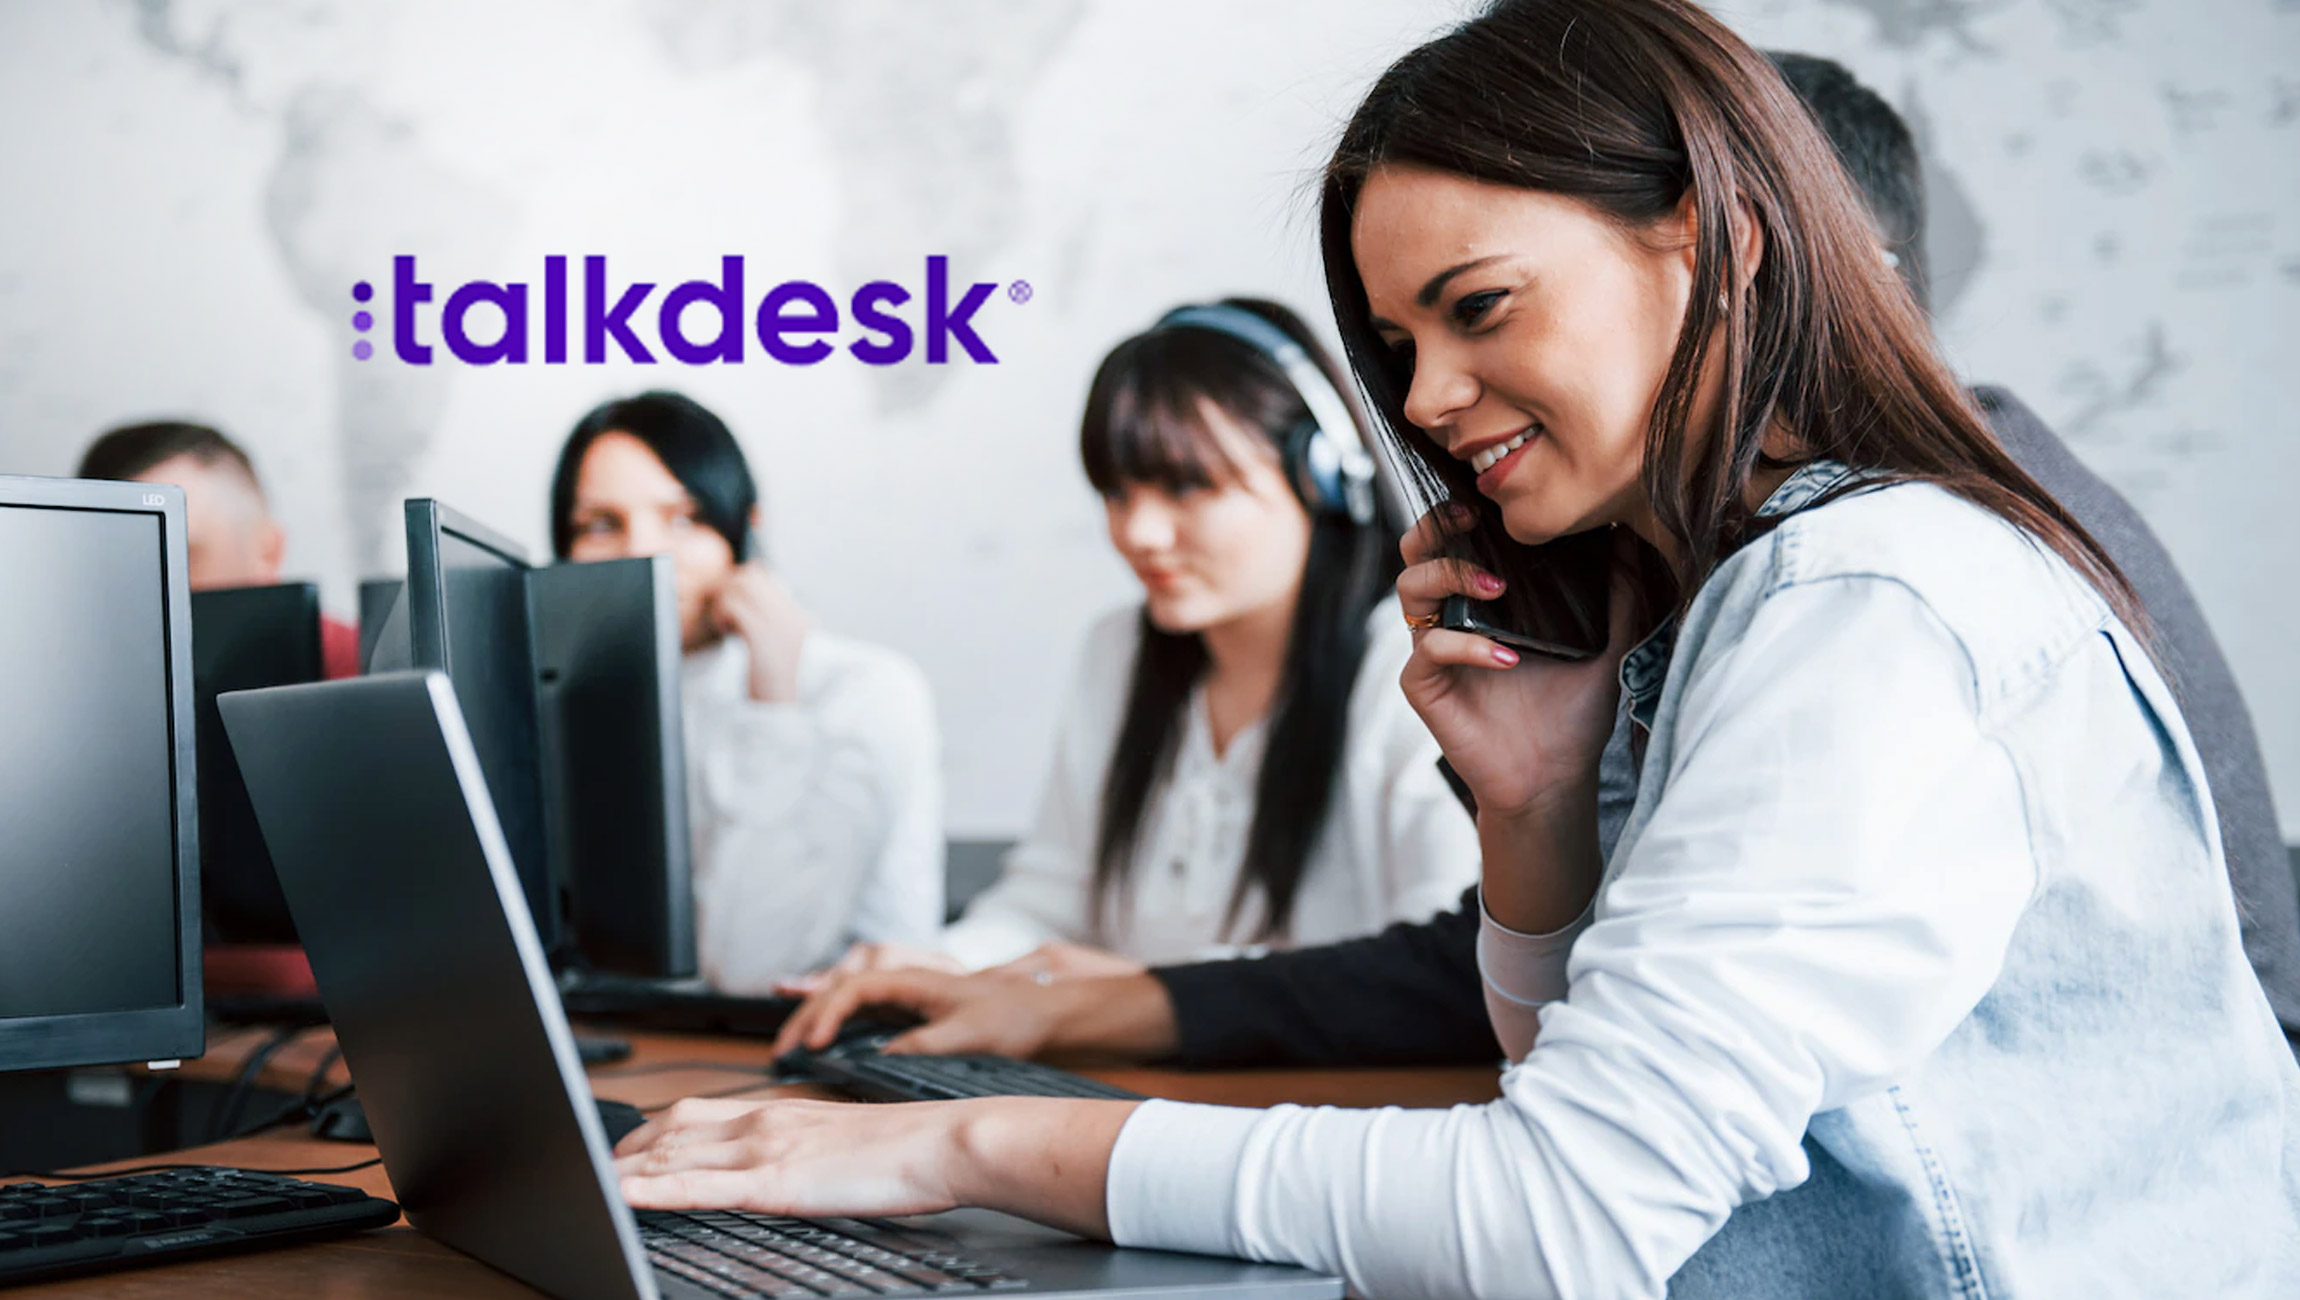 Apple Federal Credit Union Chooses Talkdesk Contact Center Solution